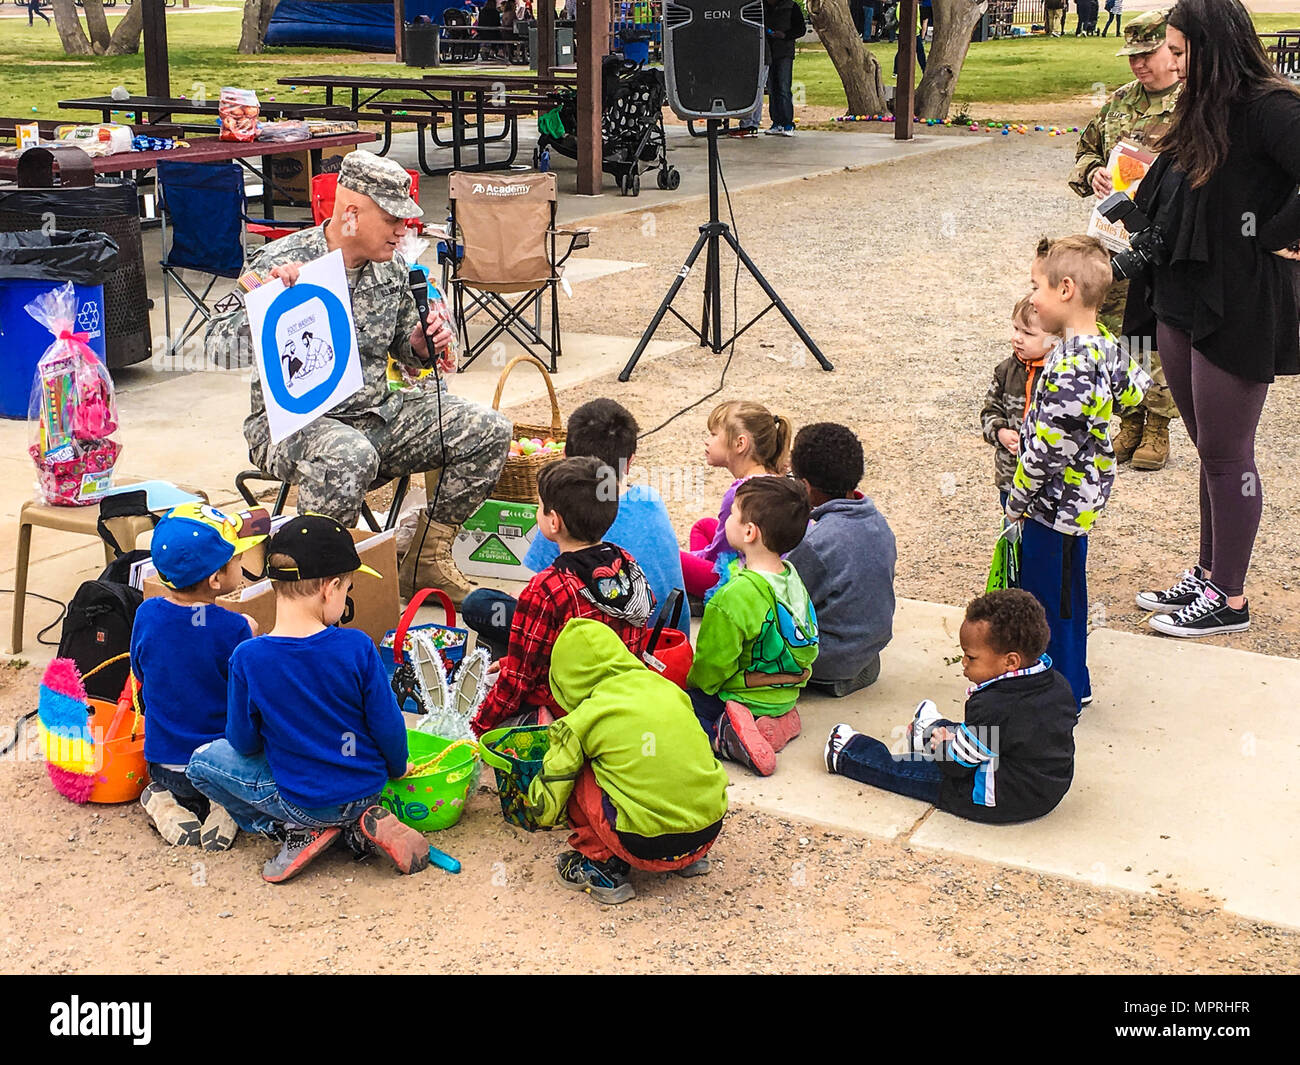 Col. Scott Sherretz, chaplain, 32nd Army Air and Missile Defense Command, reads the Easter story to a group of Soldiers’ children at Biggs Park, Fort Bliss, Texas, April 1, 2017. The goal is to stay ready by assisting families inside and outside the unit’s element. (U.S. Army photo by Sgt. 1st Class Brian G. Rhodes, 32d AAMDC Public Affairs) Stock Photo